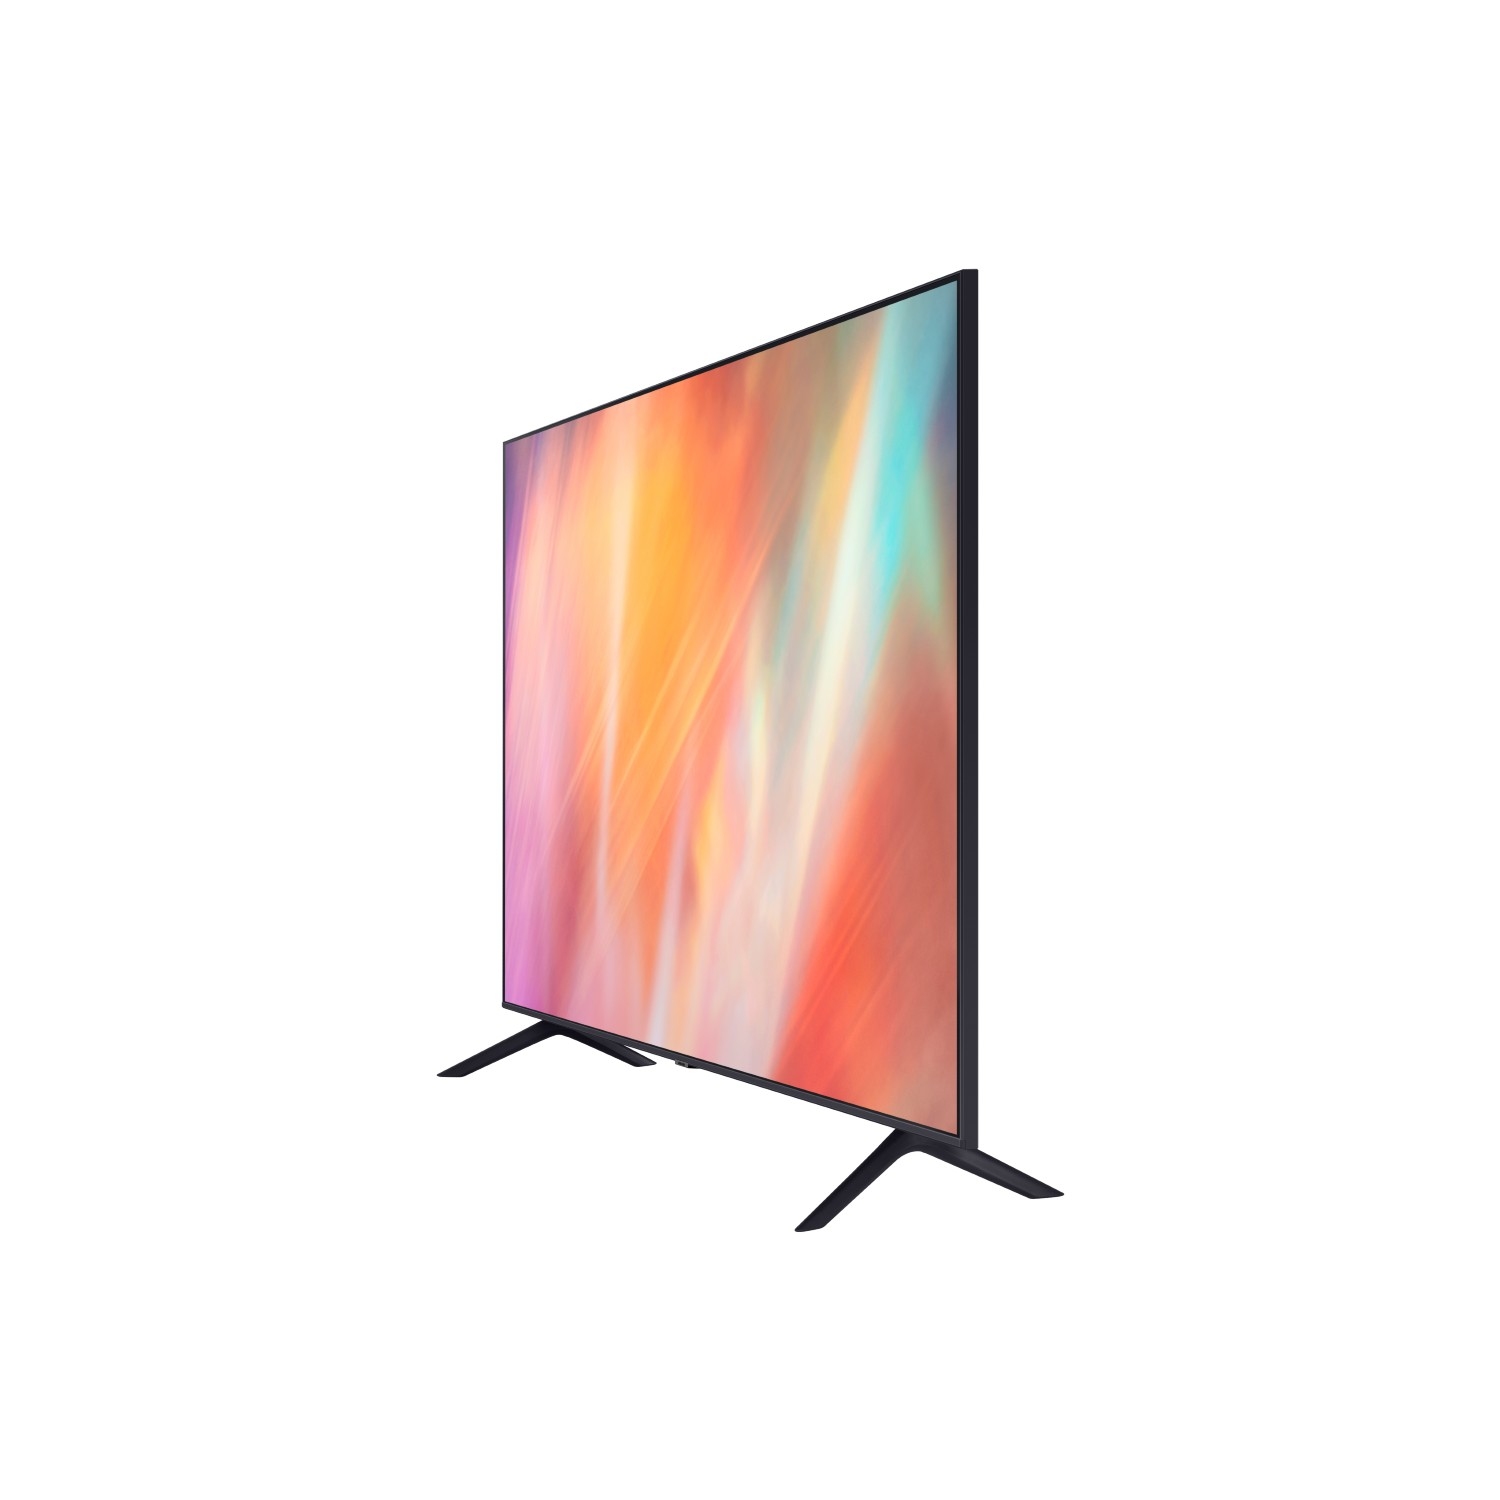 Samsung UE65AU7100KXXU 65" 4K UHD HDR Smart TV HDR powered by HDR10+ with Adaptive Sound and Boundless Screen - 4